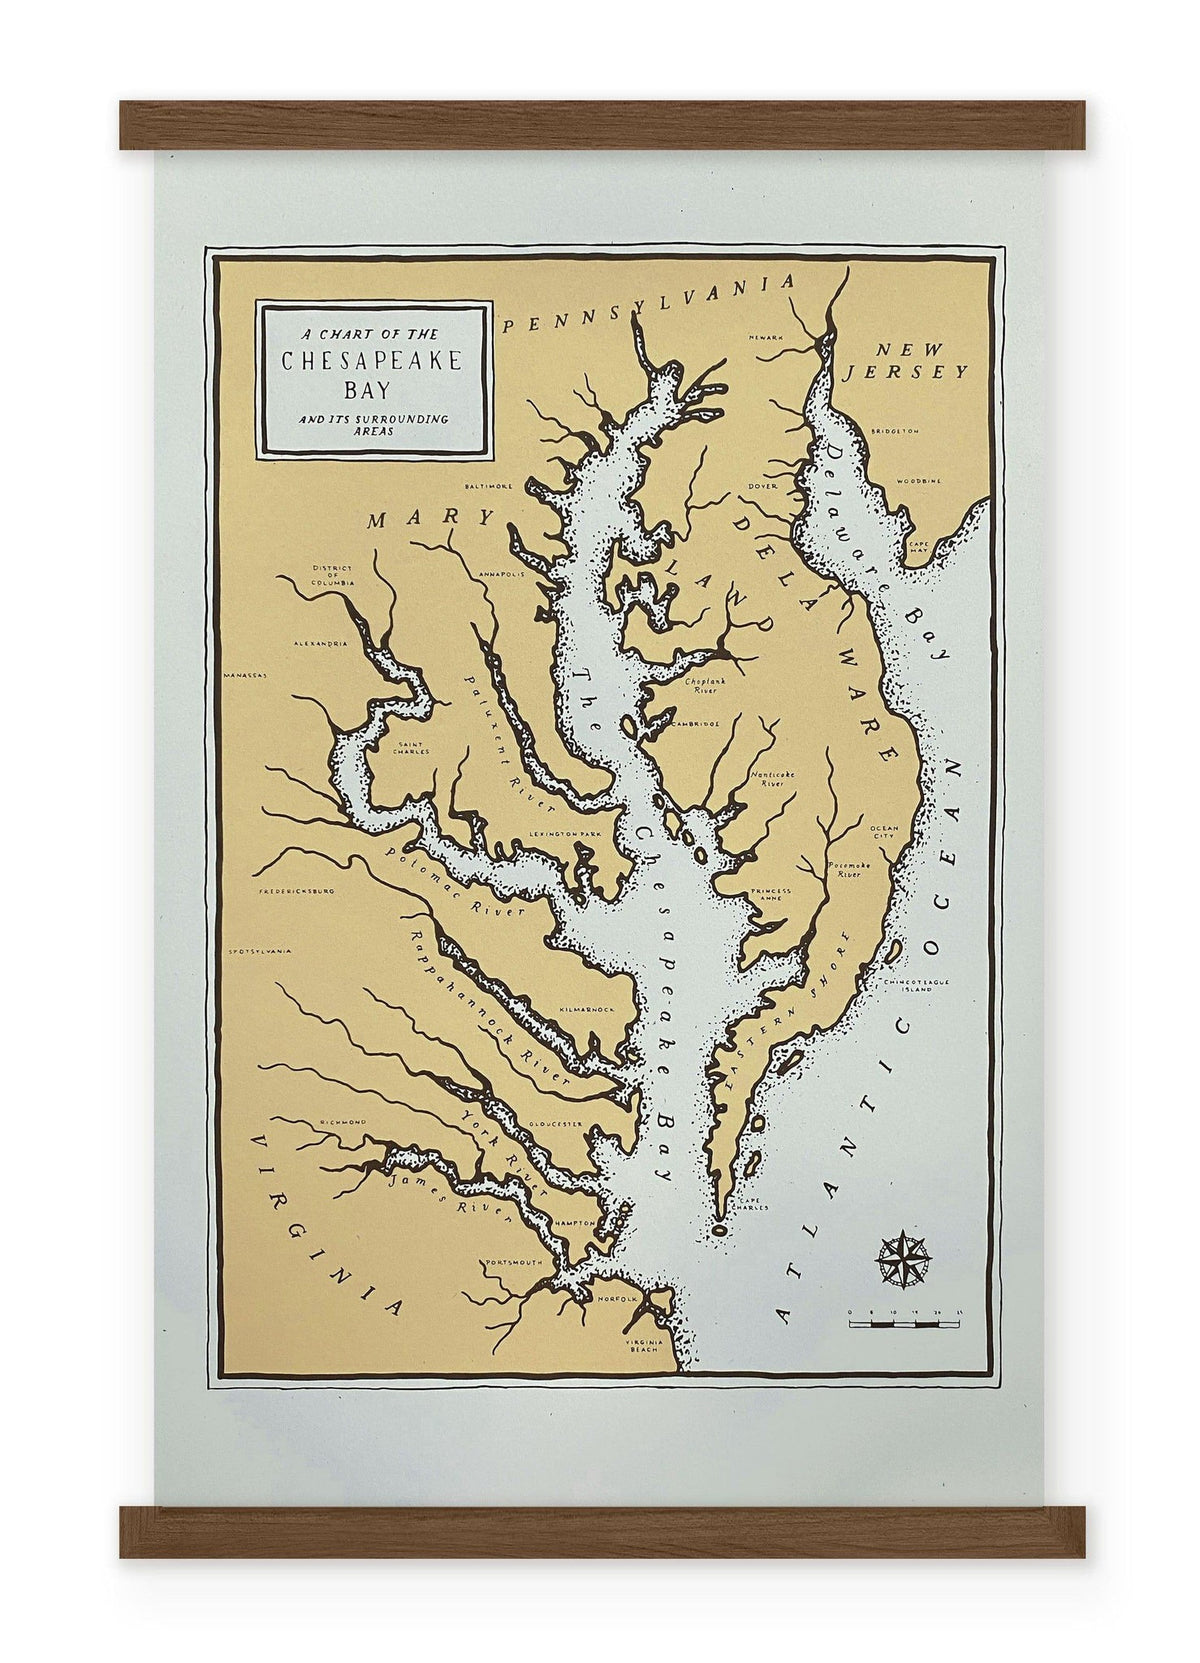 A Chesapeake Bay Map 11x17 Print of Maryland, Virginia and the Rappahannock river by The Wild Wander.